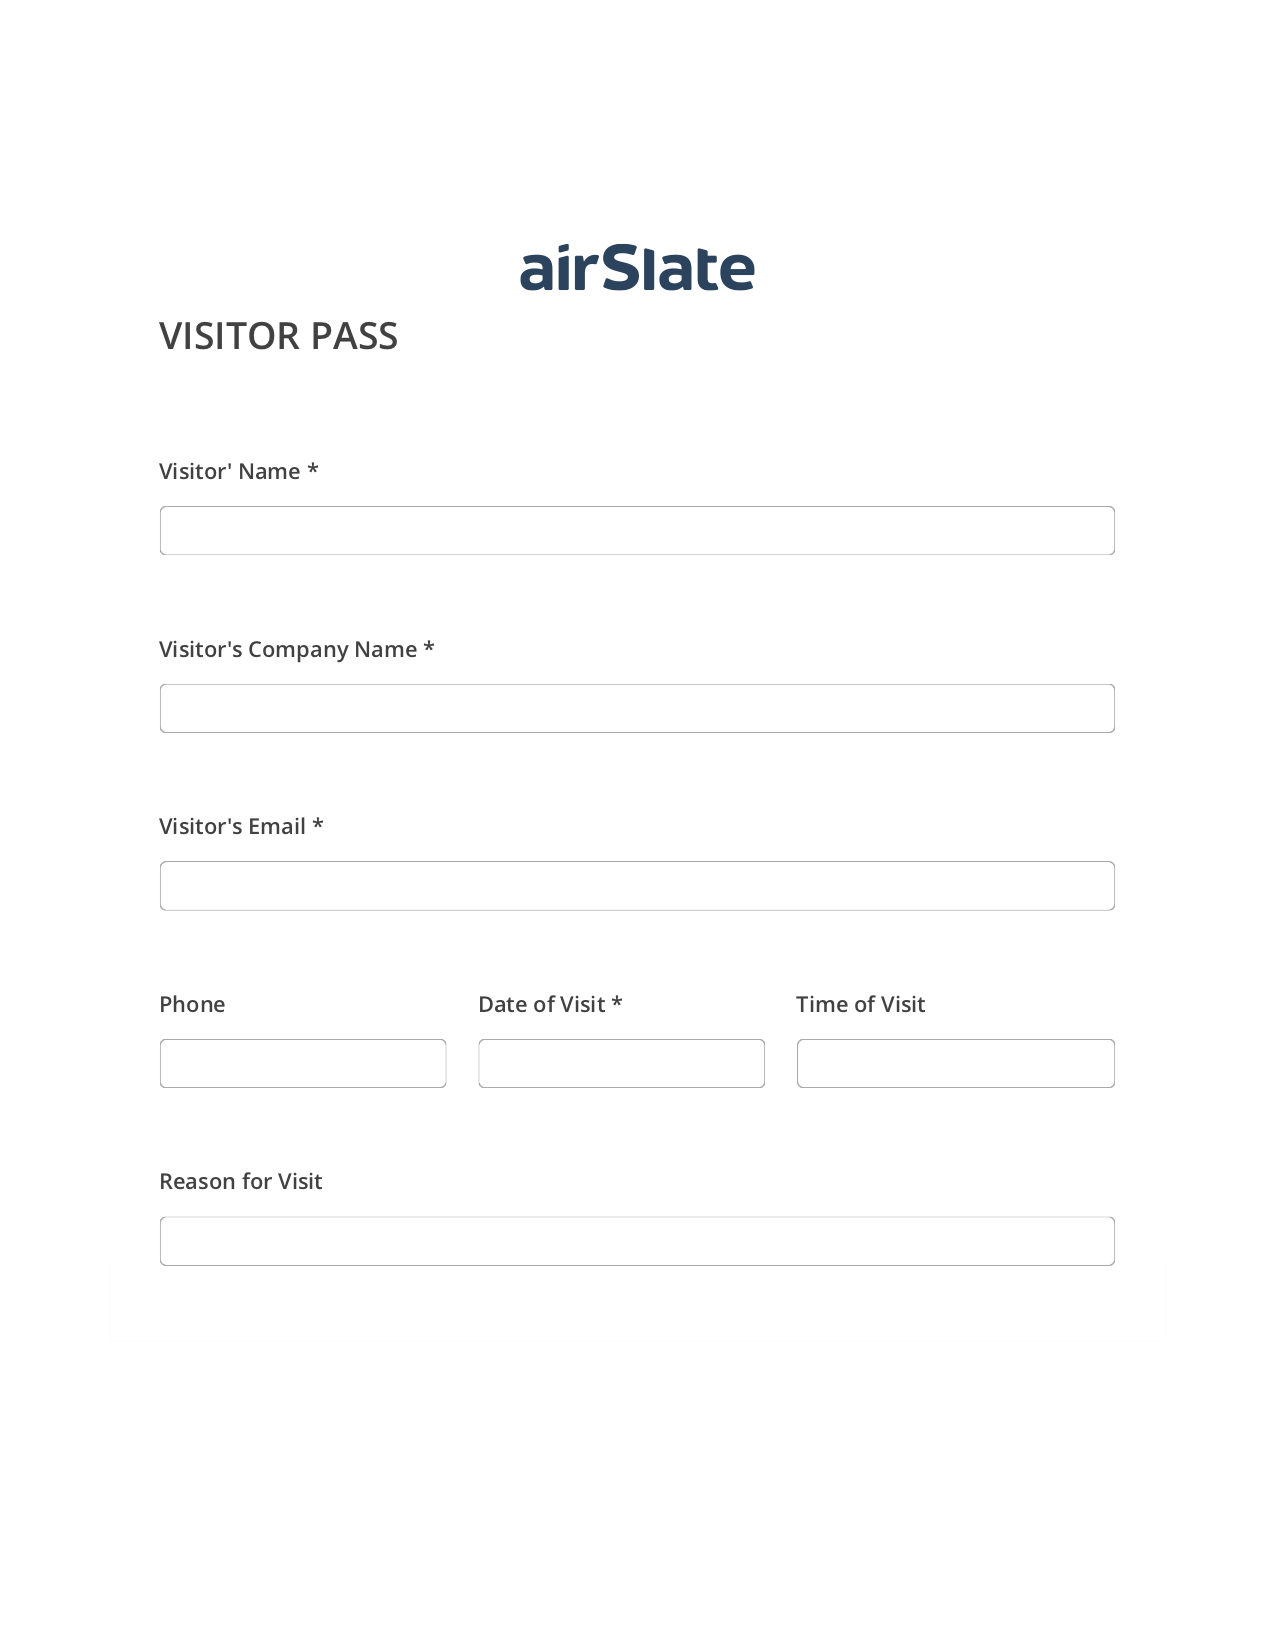 Visitor Pass Flow Pre-fill from Google Sheets Bot